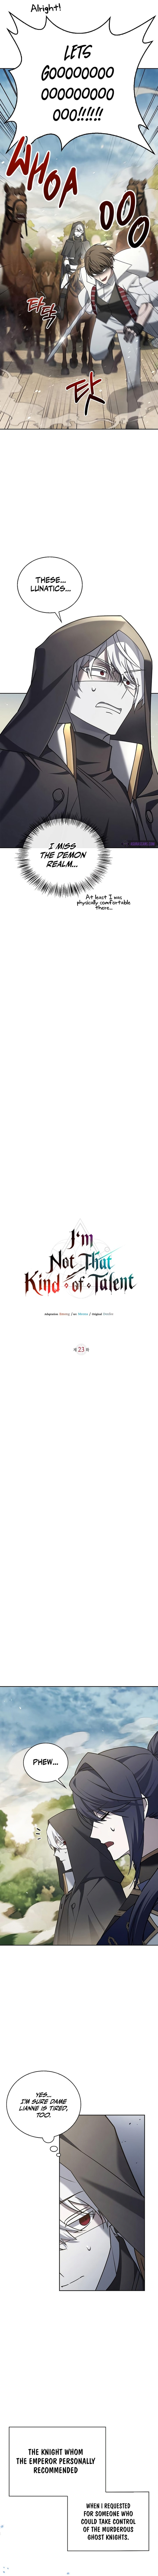 im_not_that_kind_of_talent_23_4